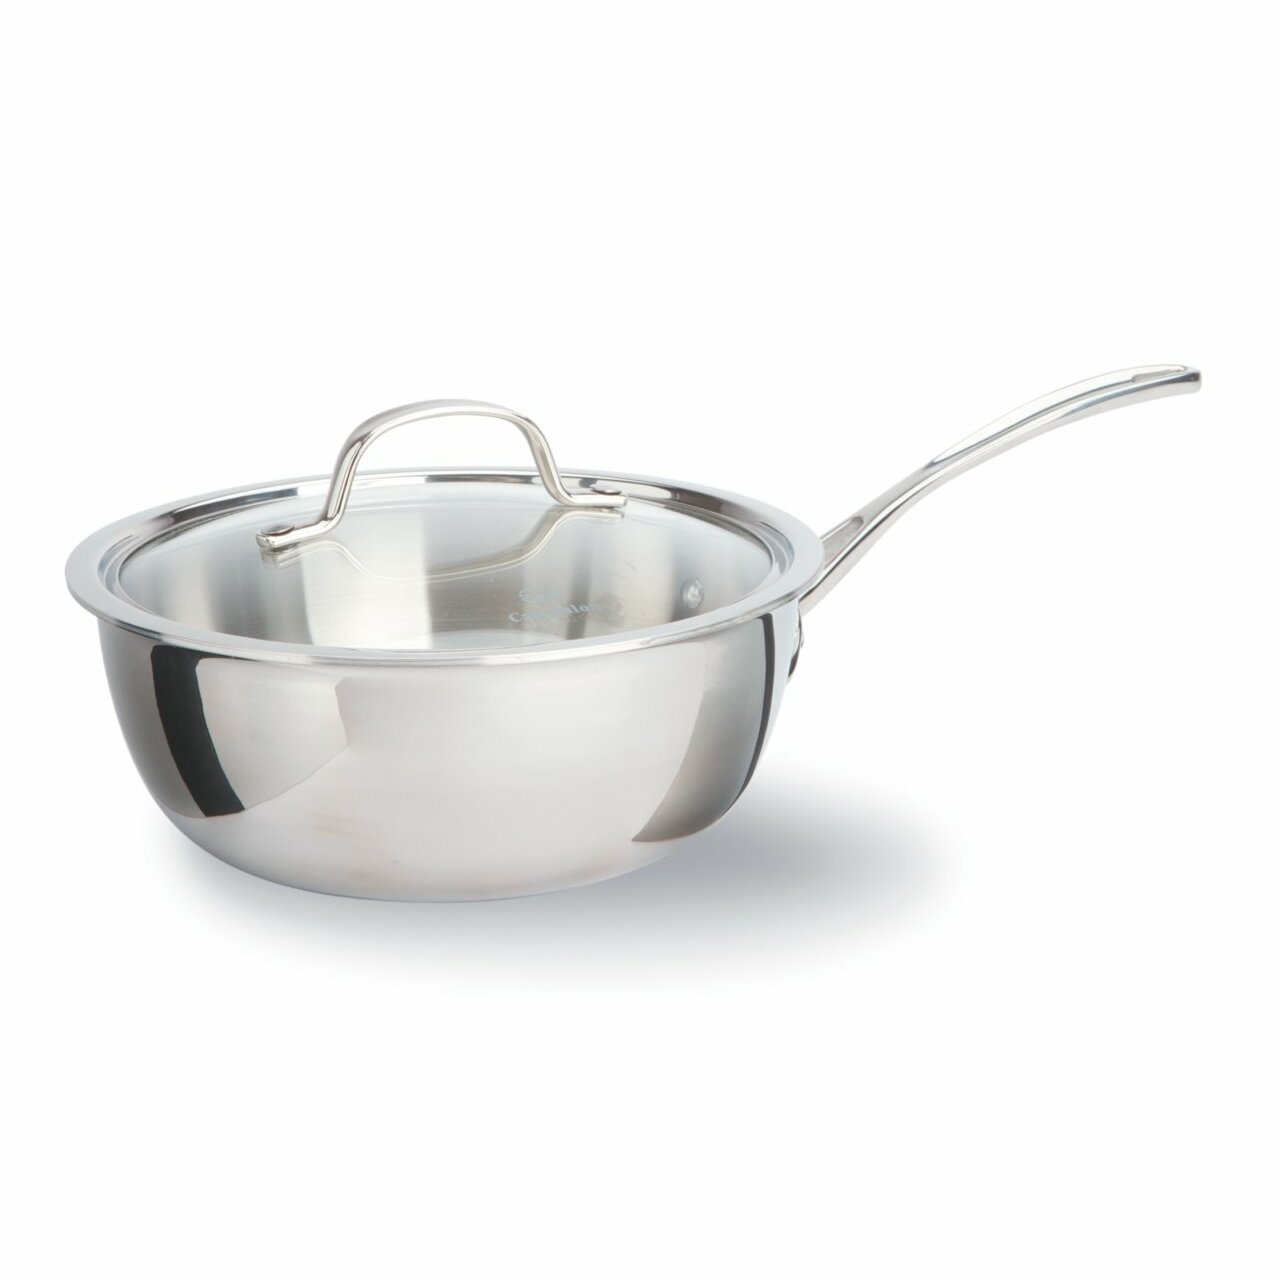 Calphalon Tri-Ply Stainless Steel 3-qt. Chef's Saute Pan with Lid Calphalon Stainless Steel Pan With Lid